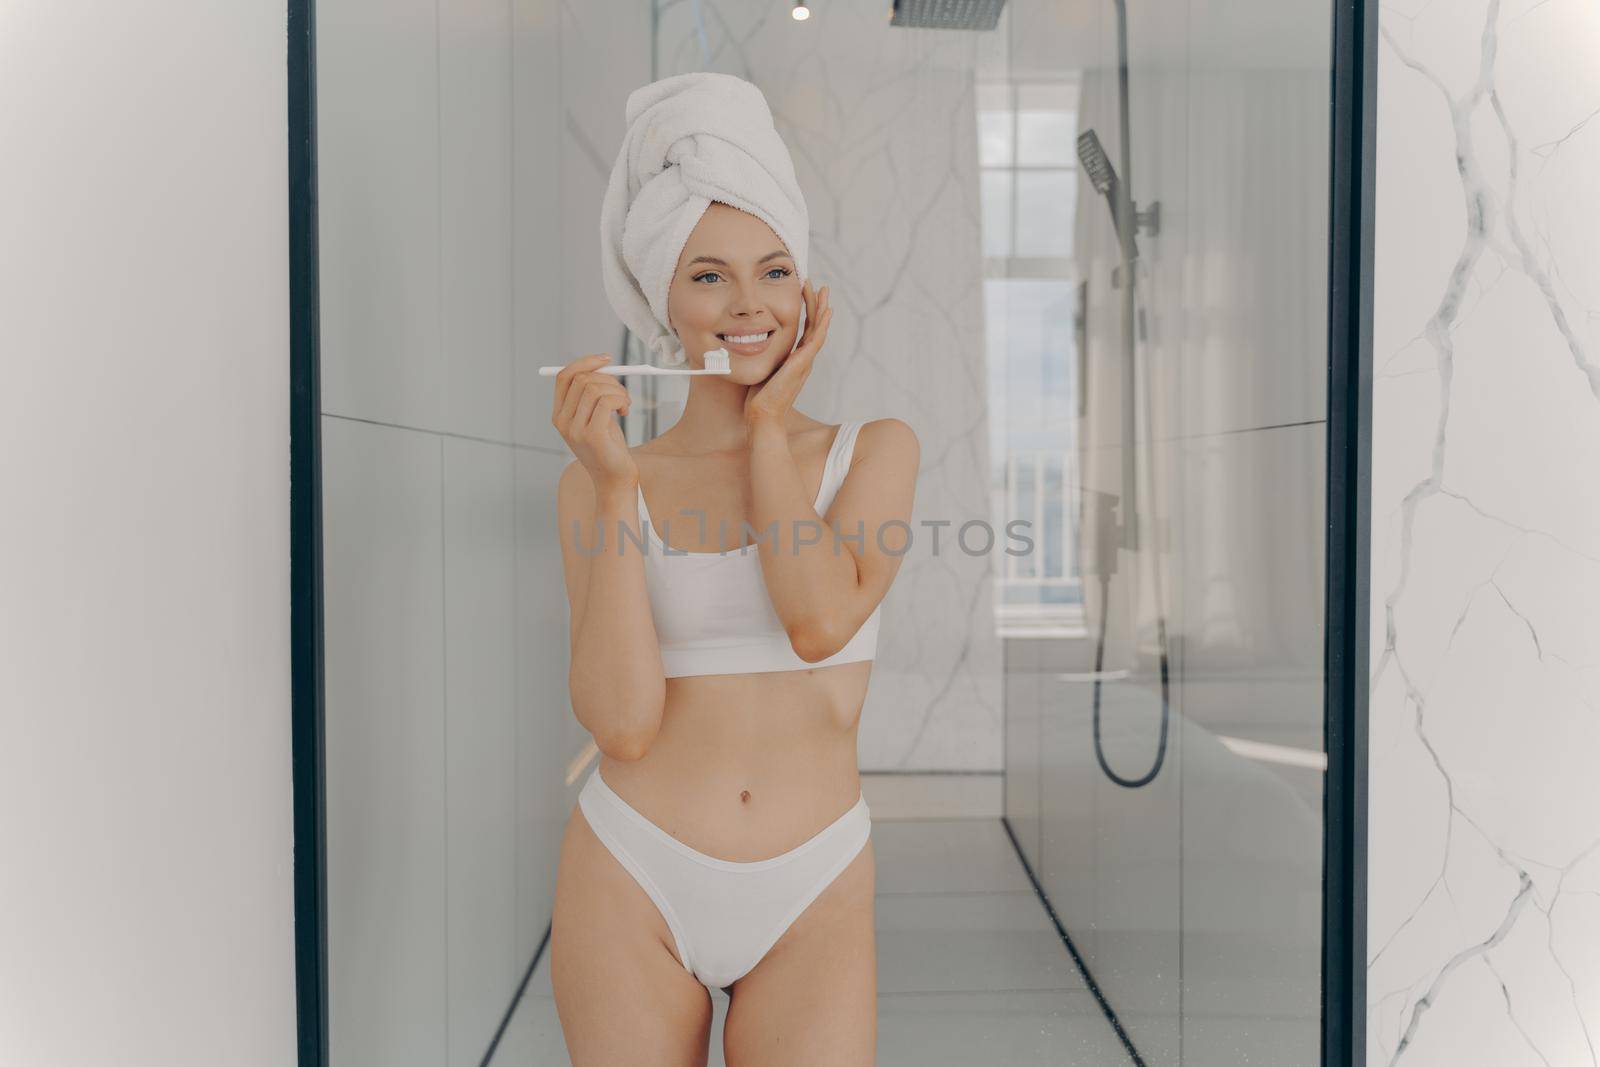 Young female model with fit body in white classic underwear standing in bathroom after taking shower while brushing her teeth. Personal body care and oral hygiene concept